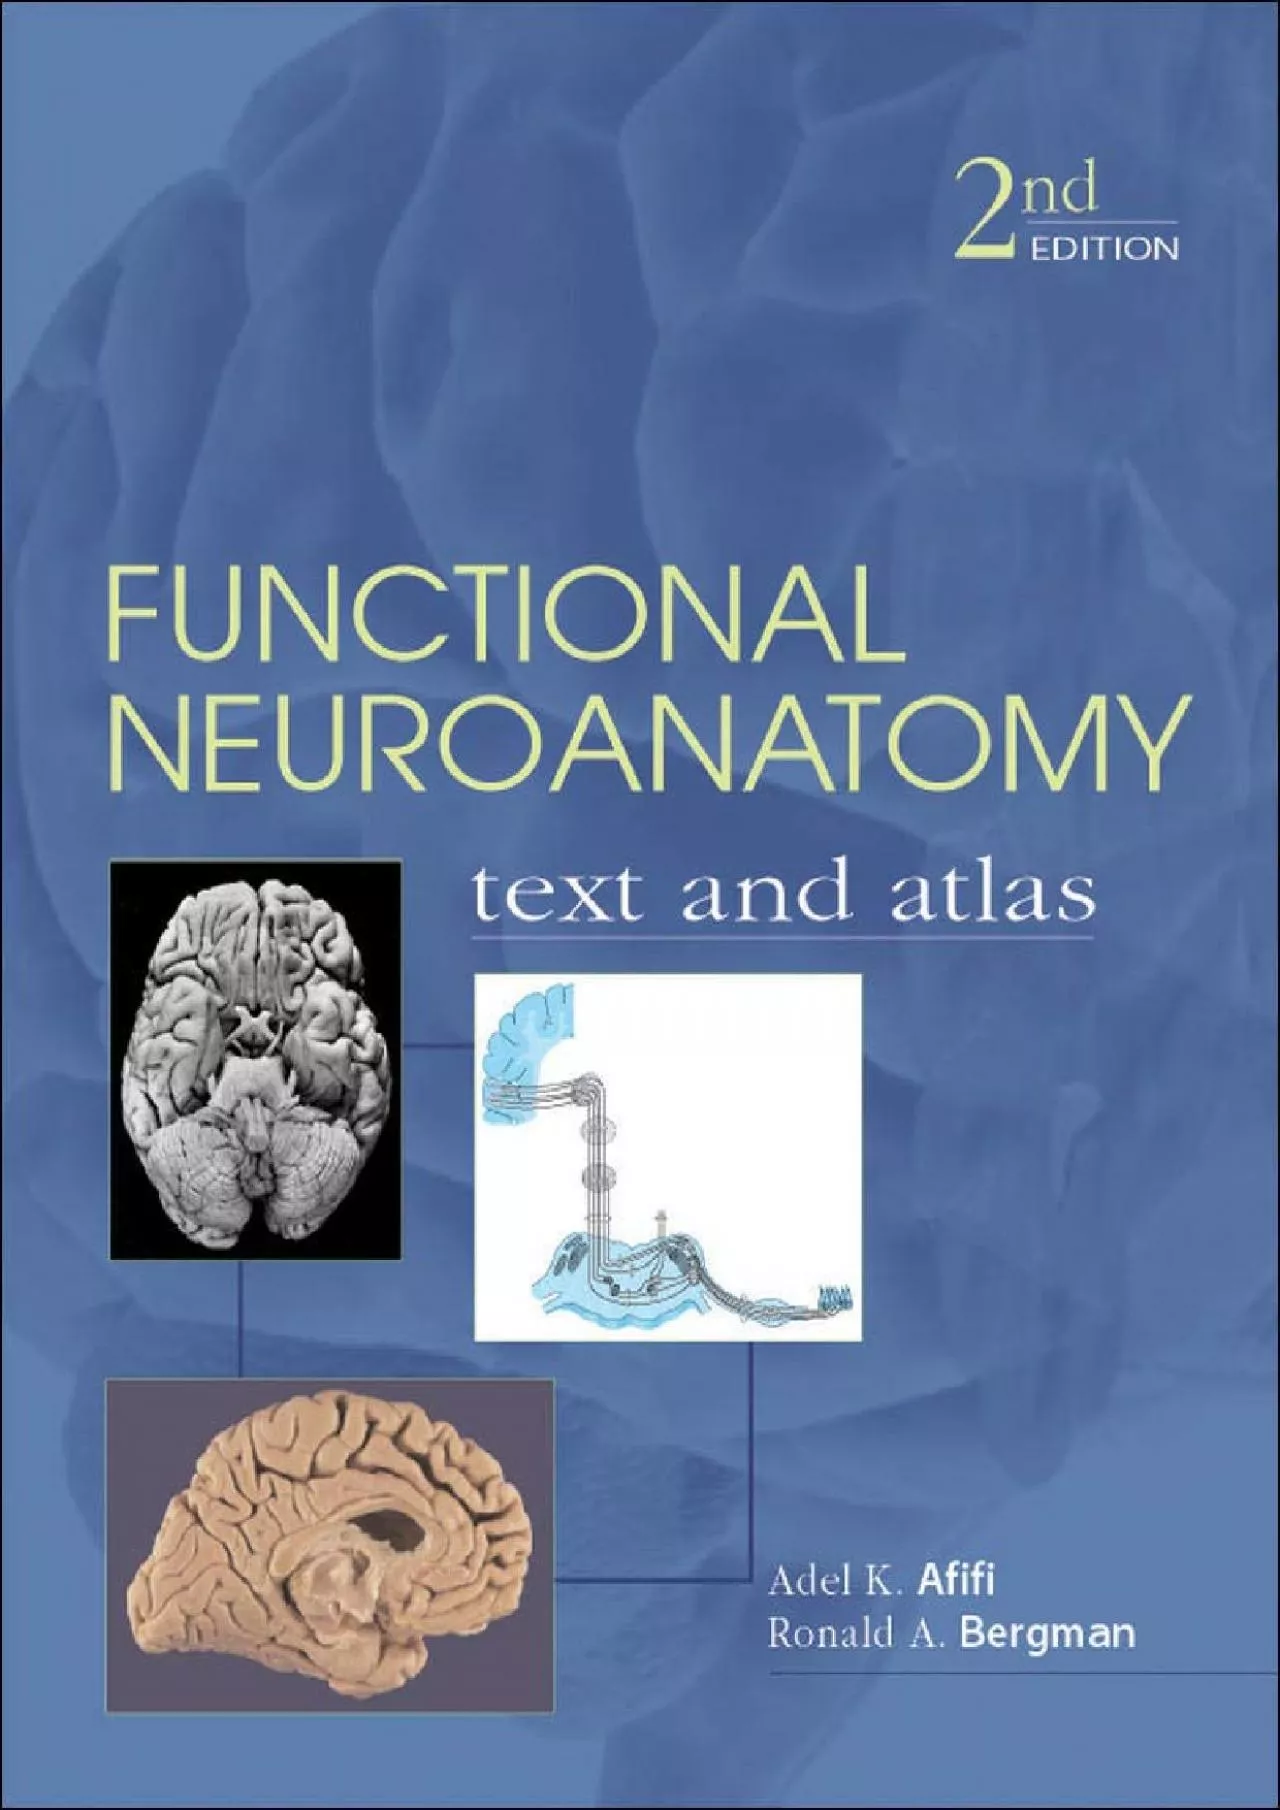 (EBOOK)-Functional Neuroanatomy: Text and Atlas, 2nd Edition: Text and Atlas (LANGE Basic